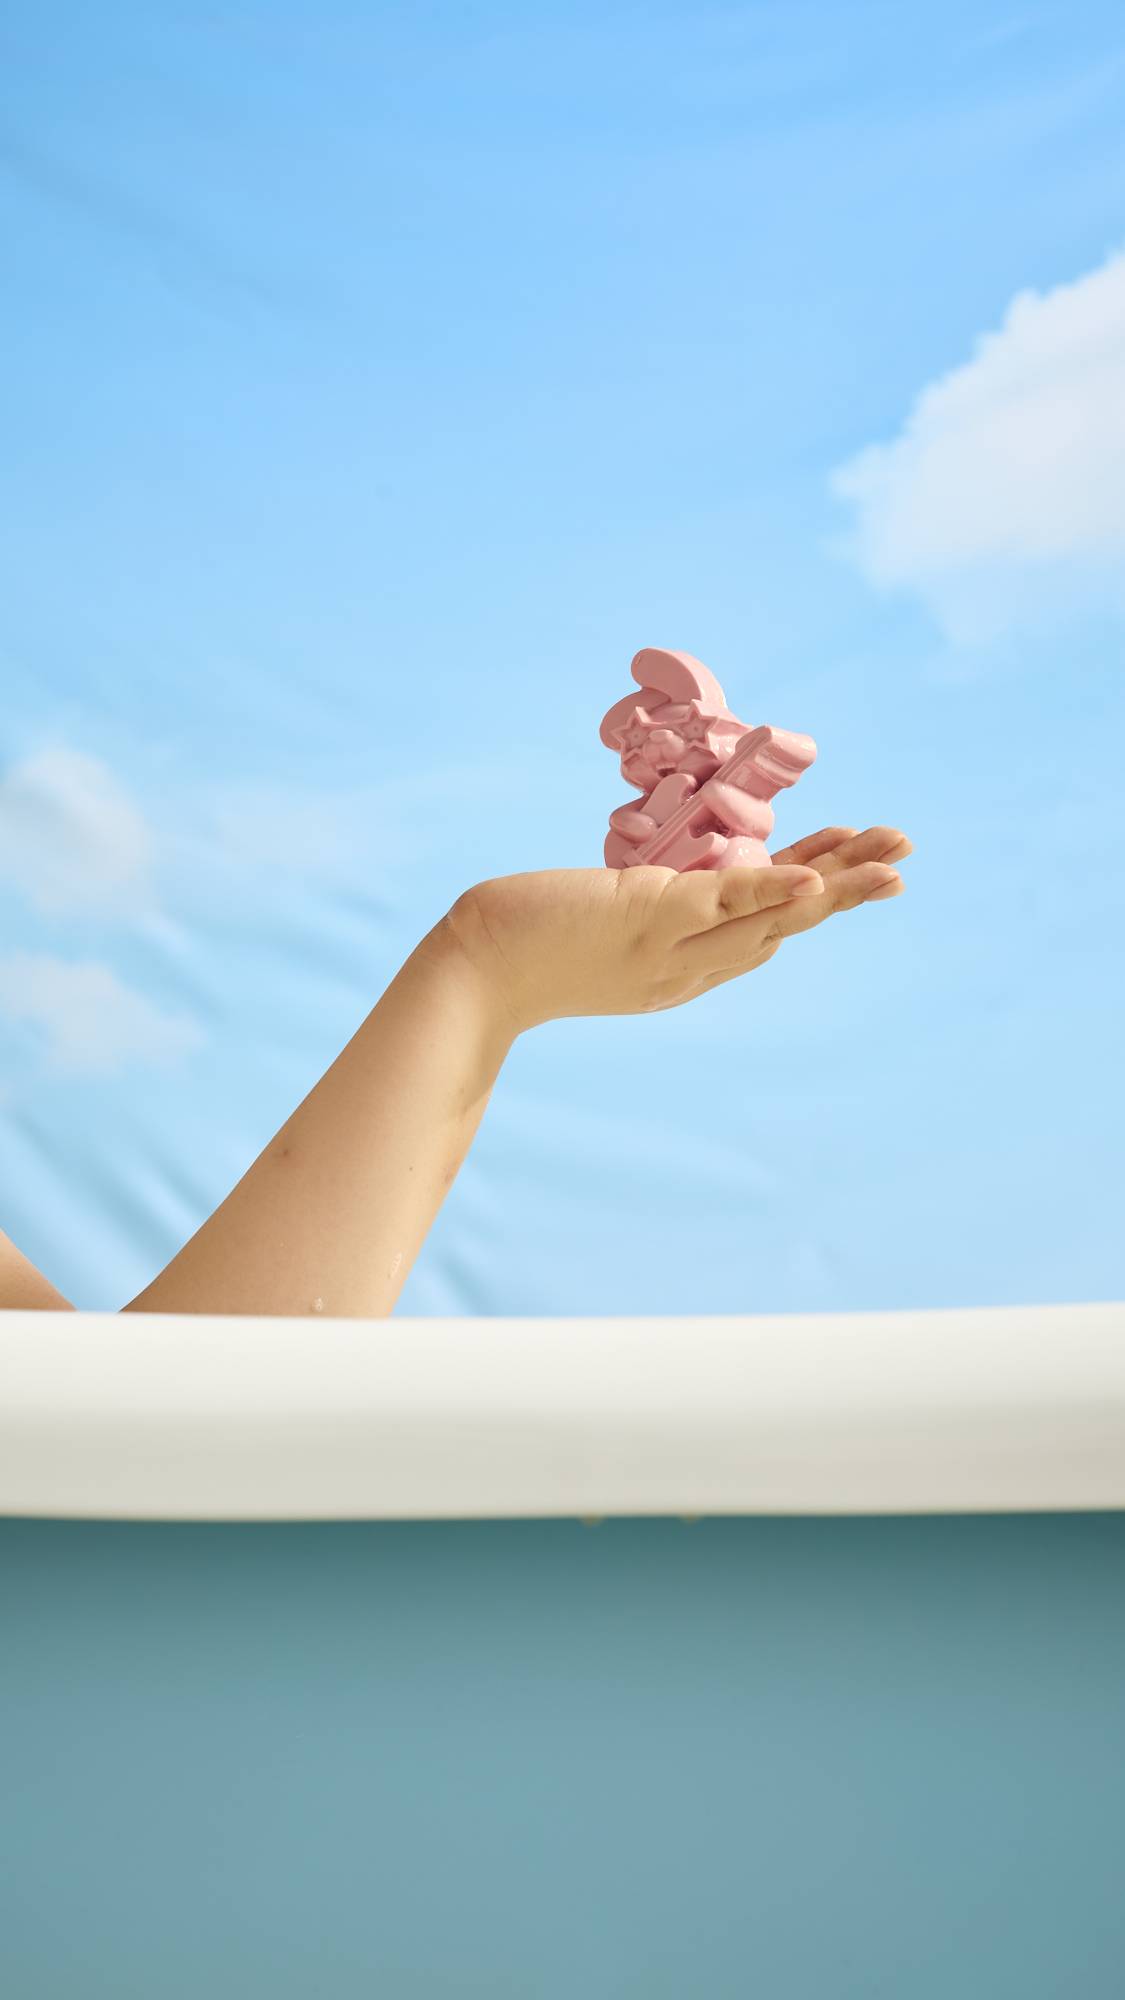 A close-up image of the model's arm over the side of an outdoor bath under blue skies as they gently hold the Rockstar Rabbit soap in their palm. 